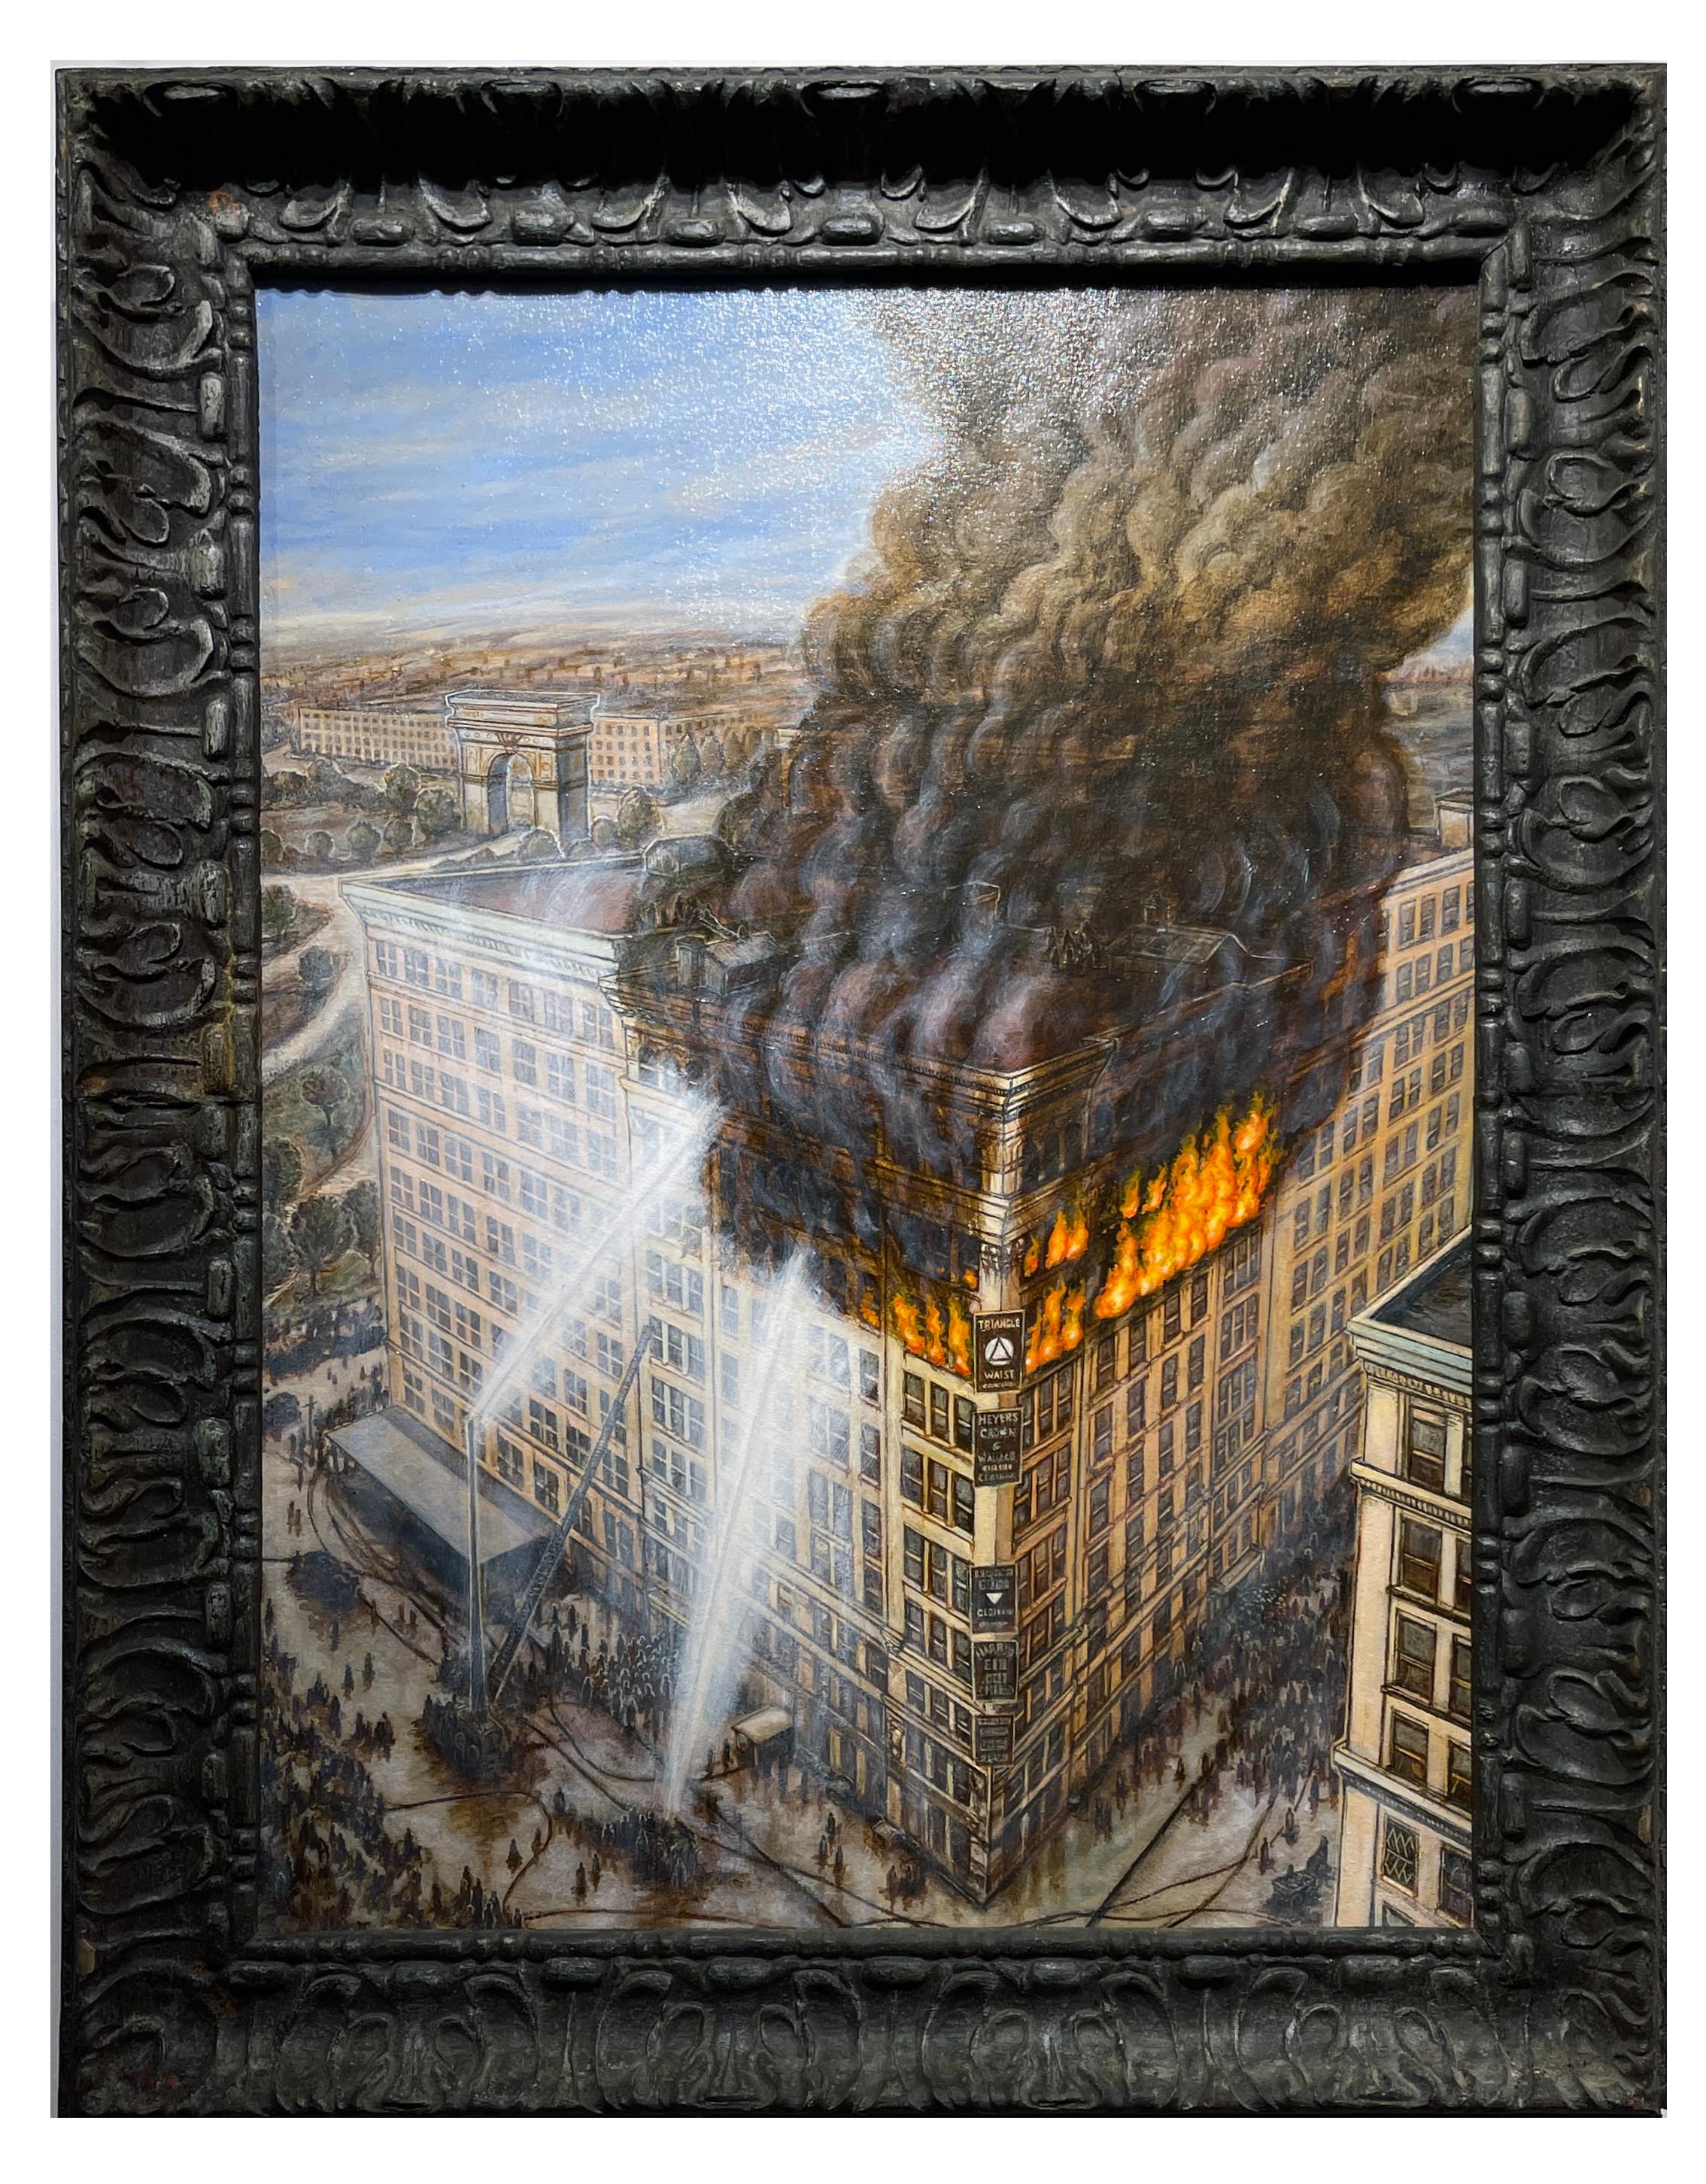 Eric Edward Esper Figurative Painting - The Triangle Shirtwaist Factory Fire of March 24, 1911 - Original Oil Painting